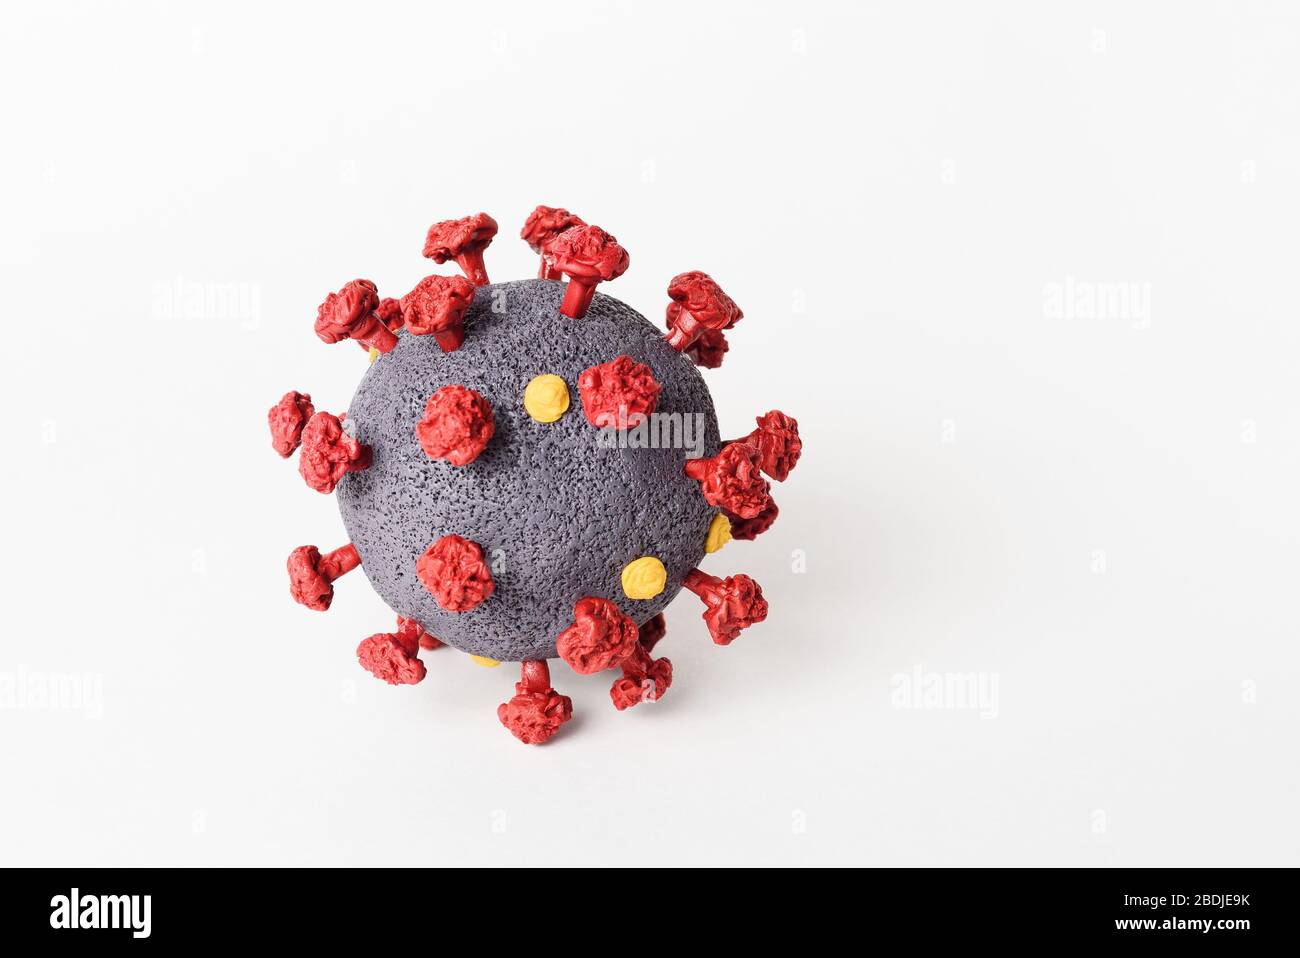 SARS-CoV-2 coronavirus model close-up on a white background. The causative agent of the disease COVID-19 Stock Photo